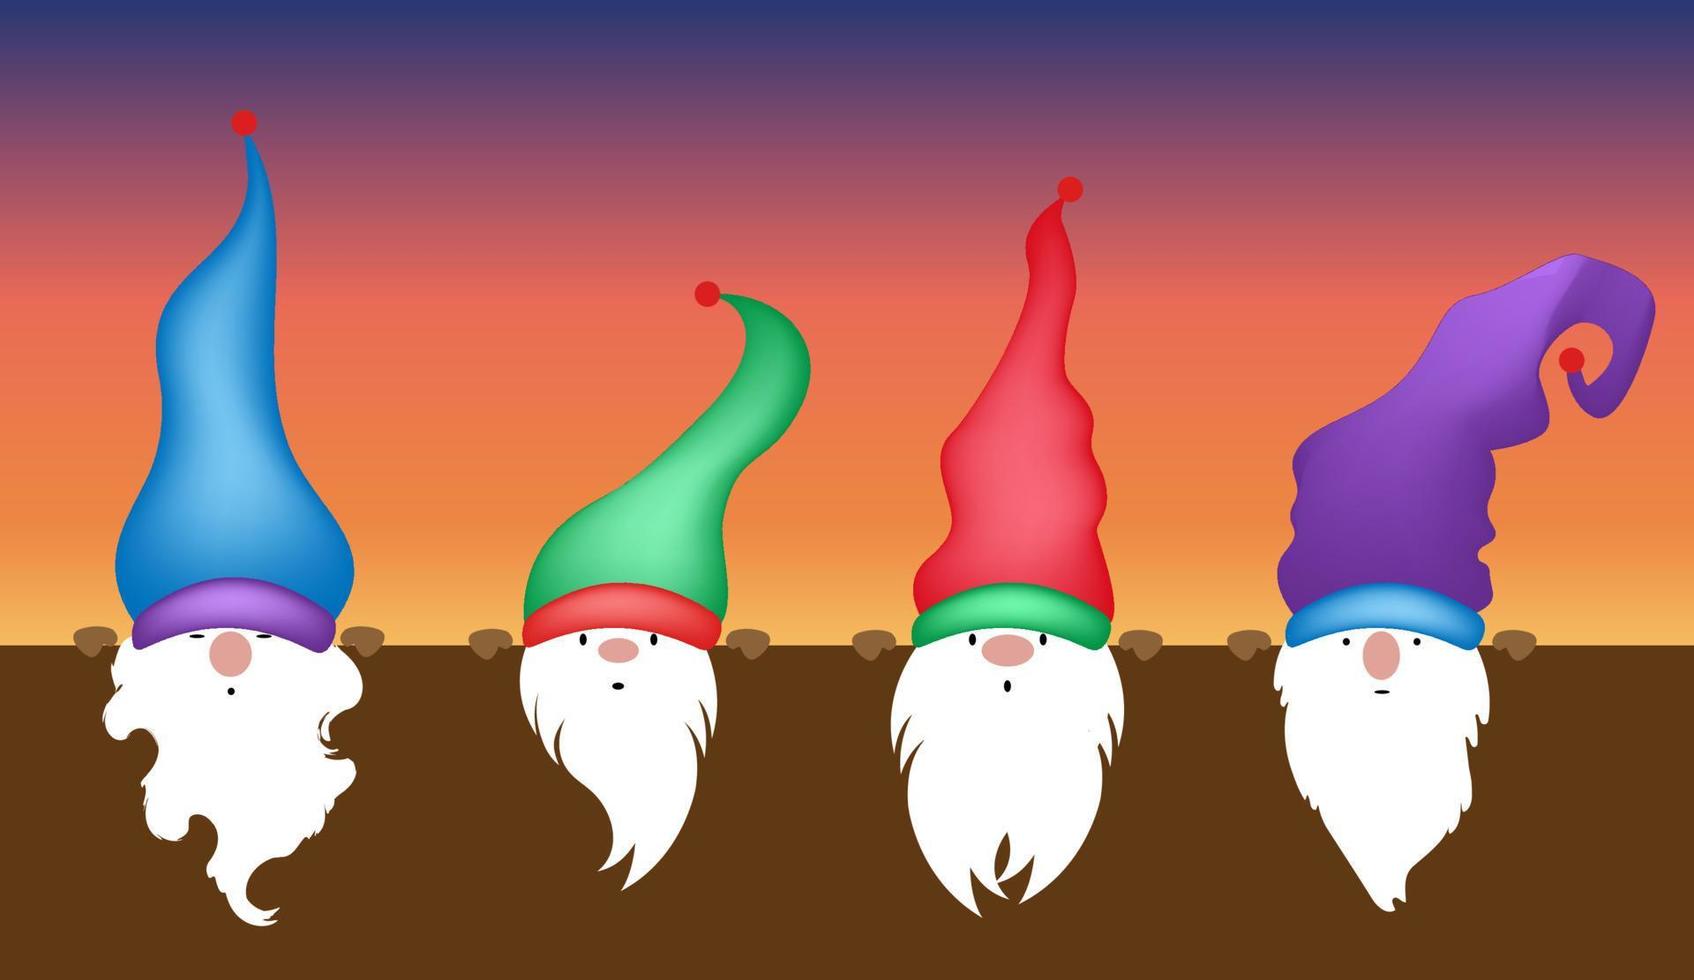 Set of Christmas Gnome, Scandinavian Nordic Gnome, Cute Christmas Santa Gnome Elf. Vector Illustration isolated on colorful background. Xmas elements for design, invitations and greeting cards